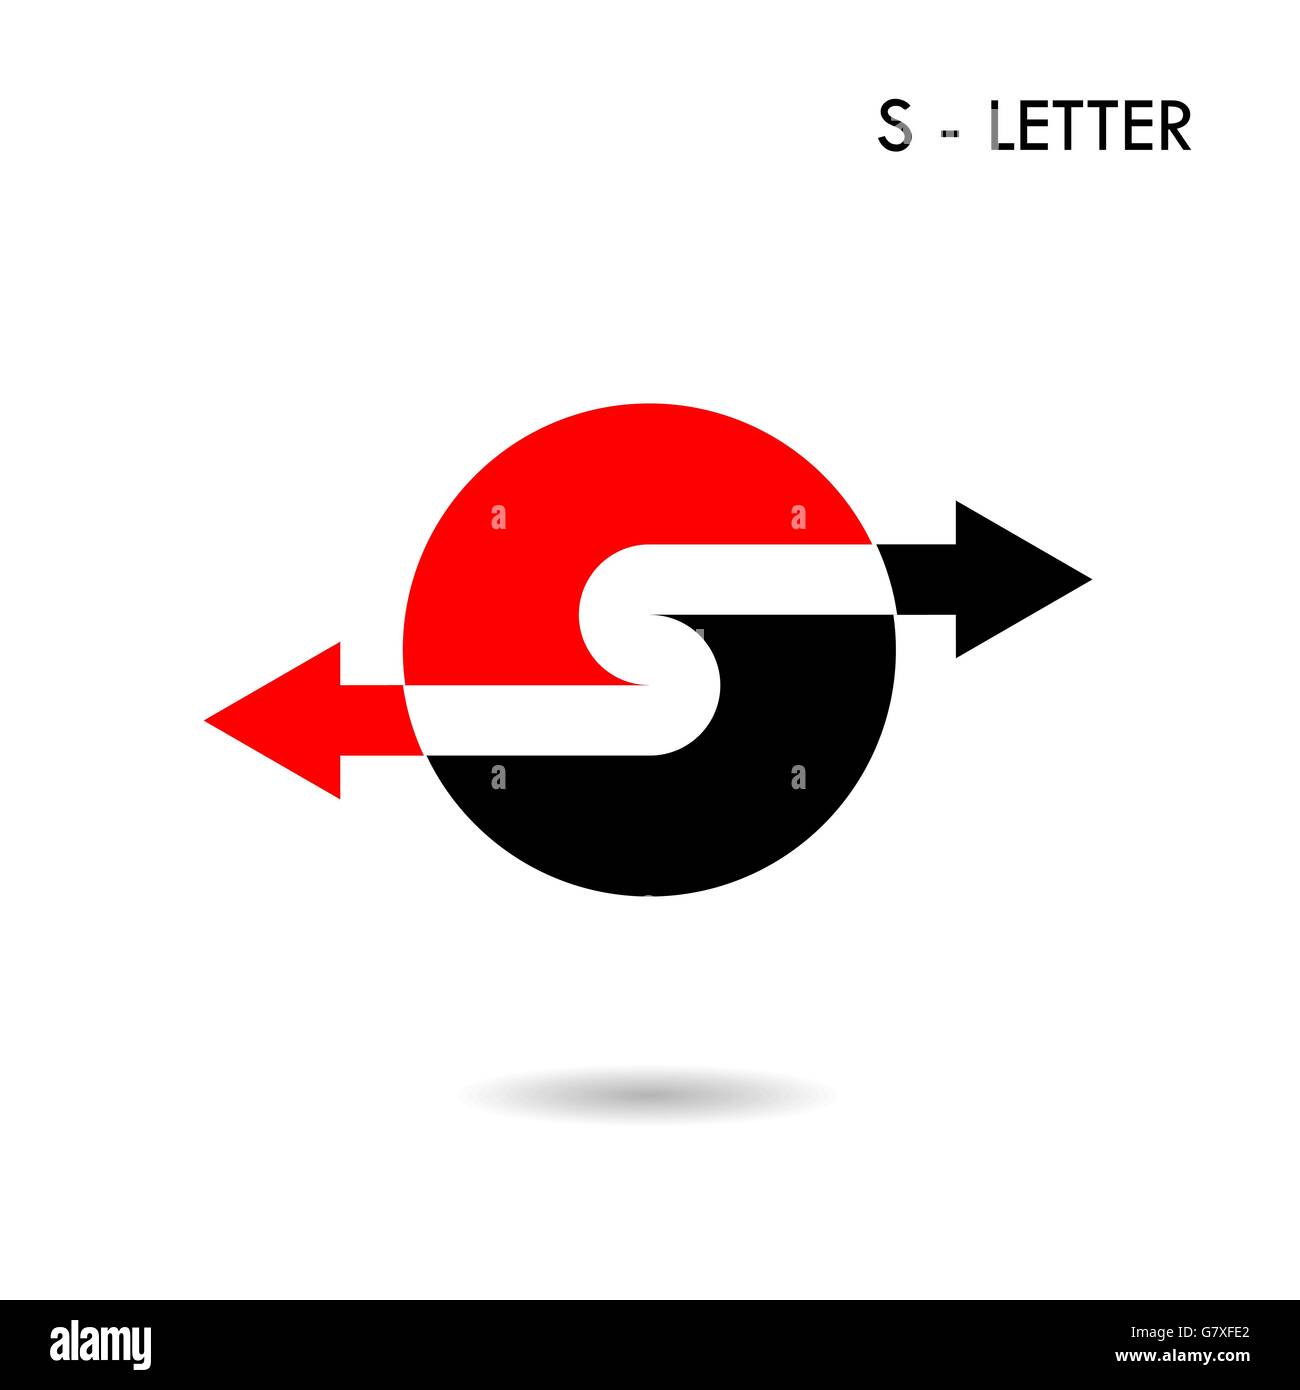 S-letter icon abstract logo design and Arrow symbol.Creative S-alphabet and Arrow symbol.Vector illustration Stock Vector